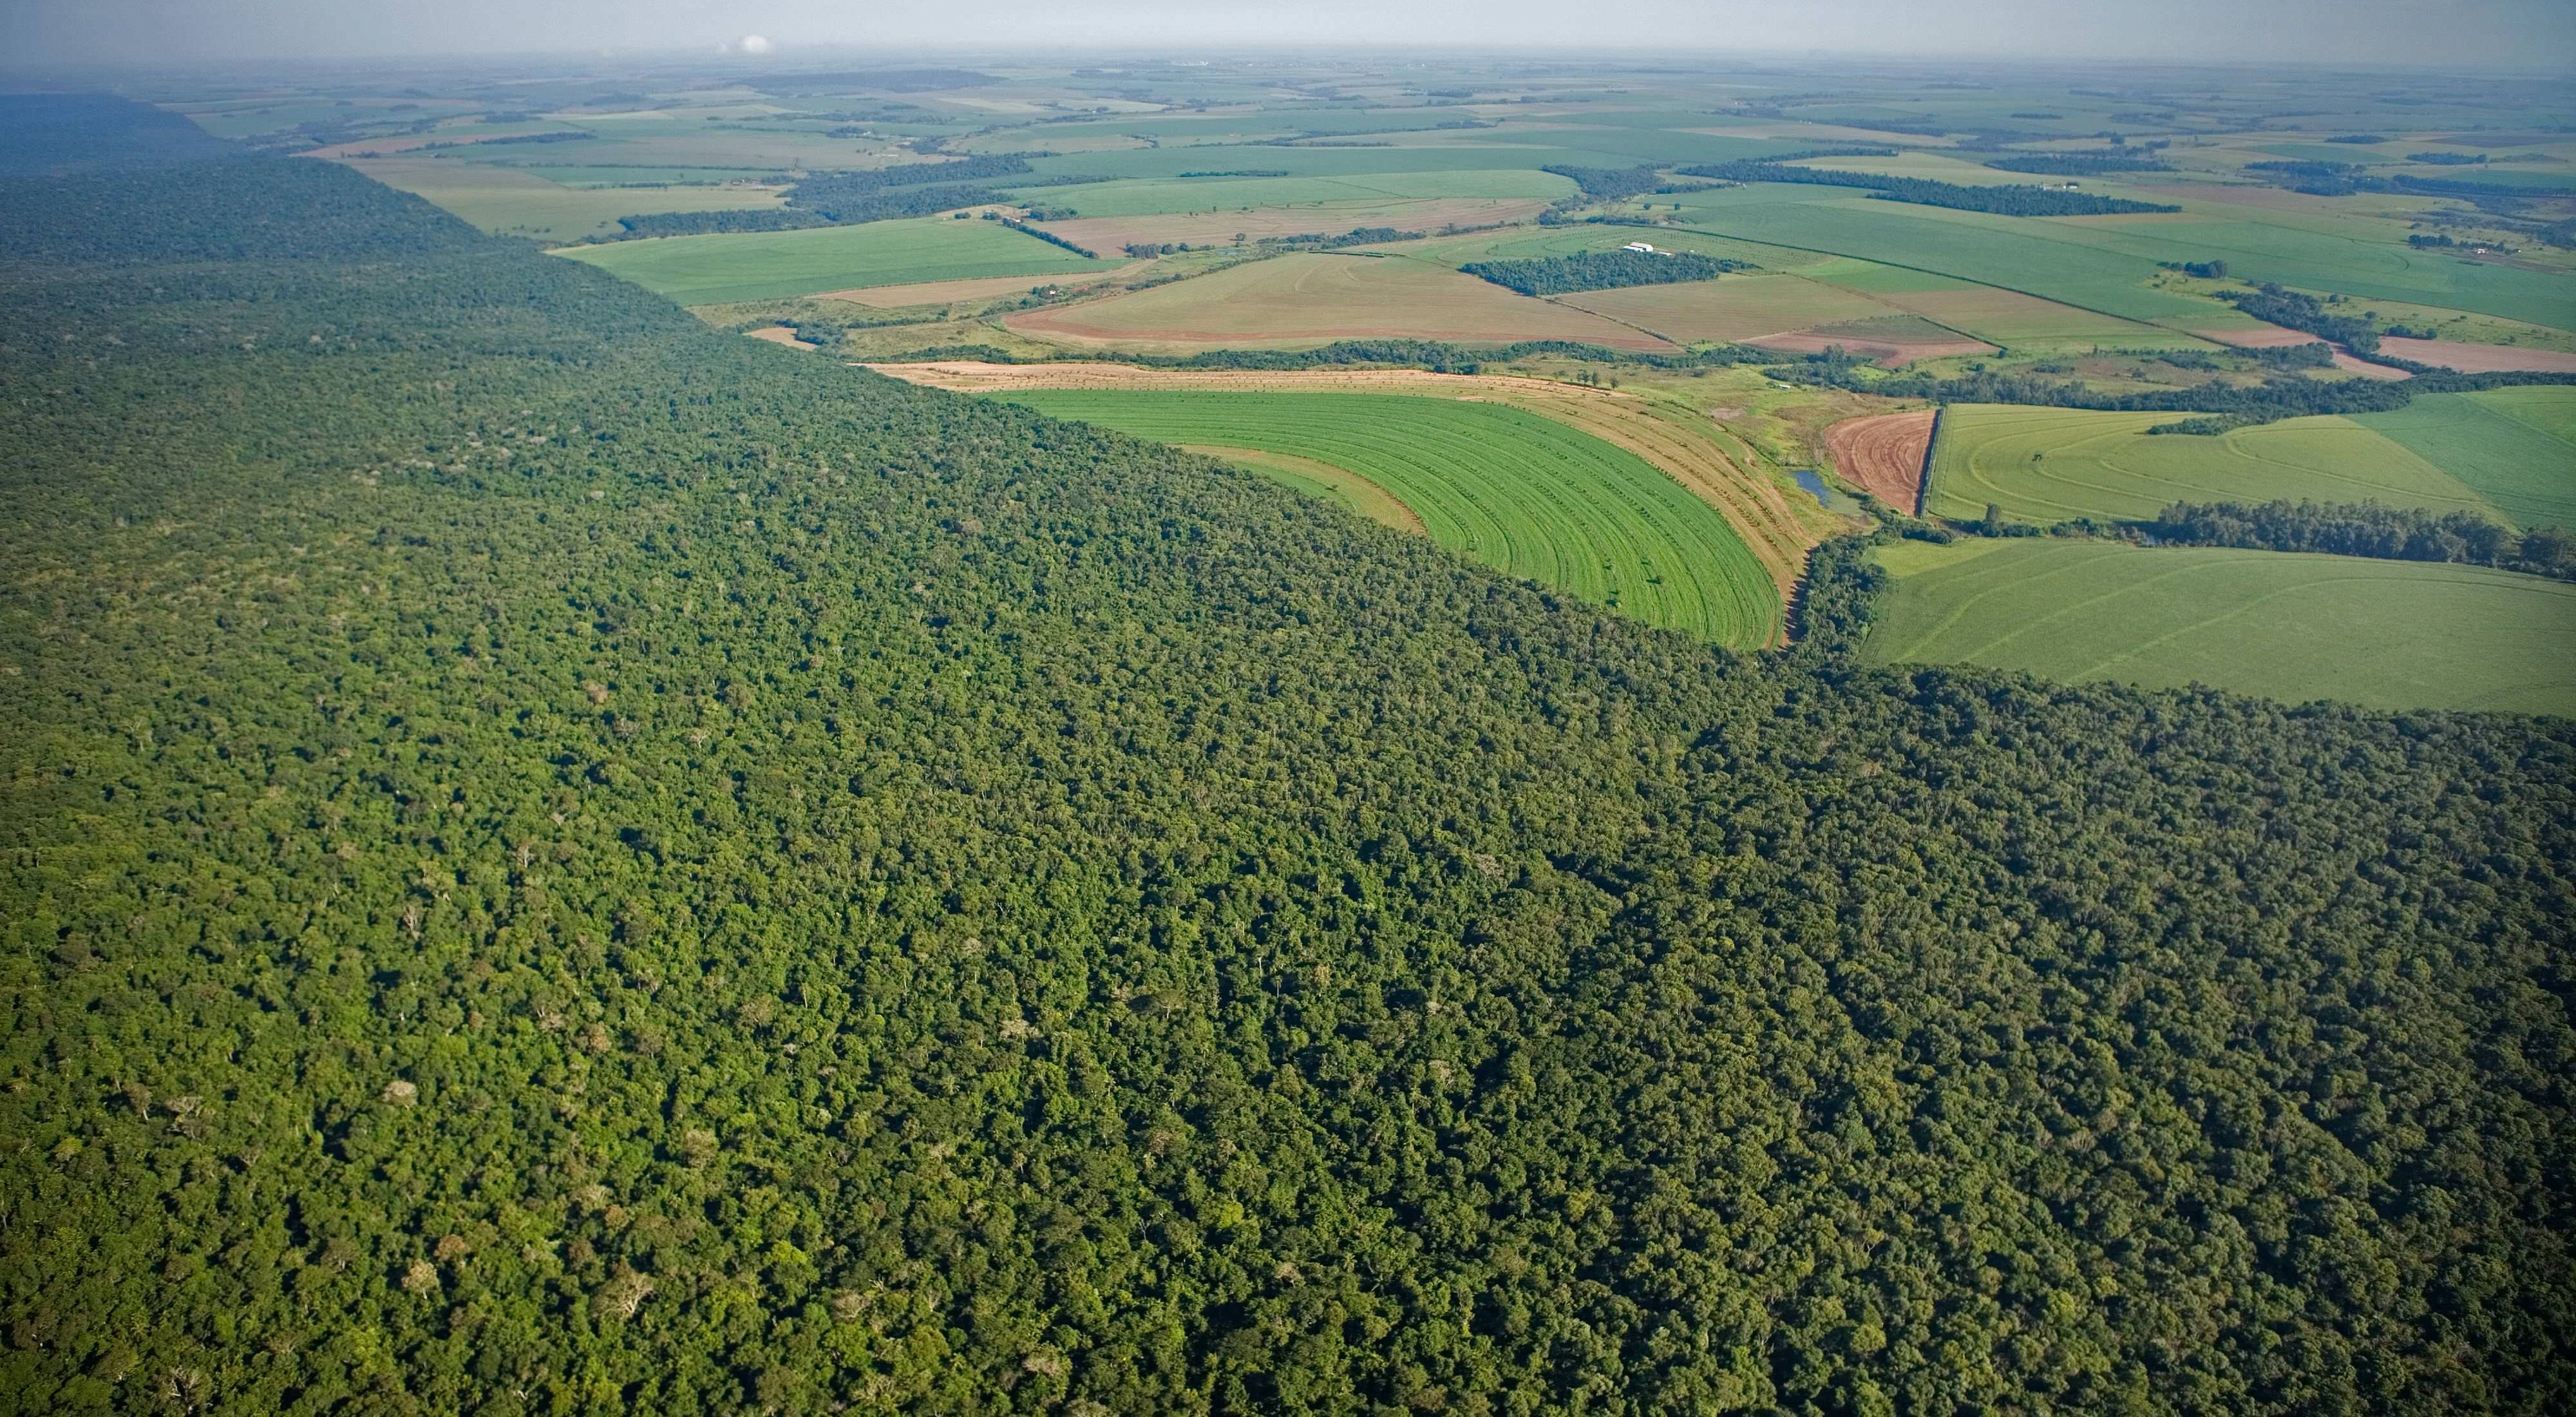 Aerial view of forests in foreground and agricultural fields in the background.